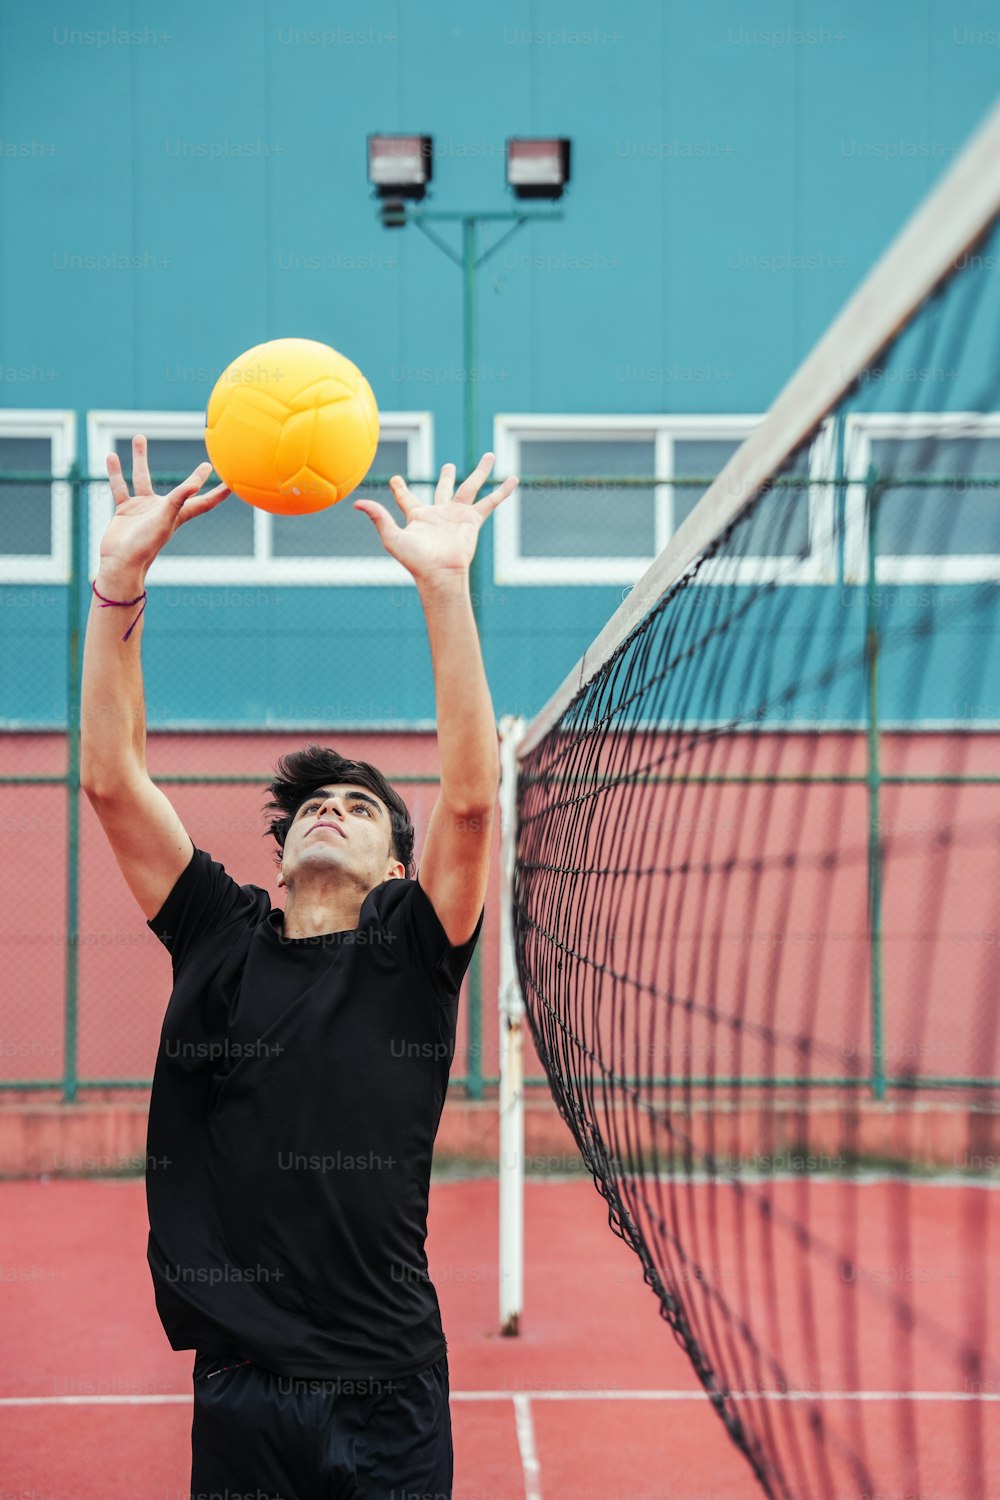 a man reaching up to hit a yellow ball